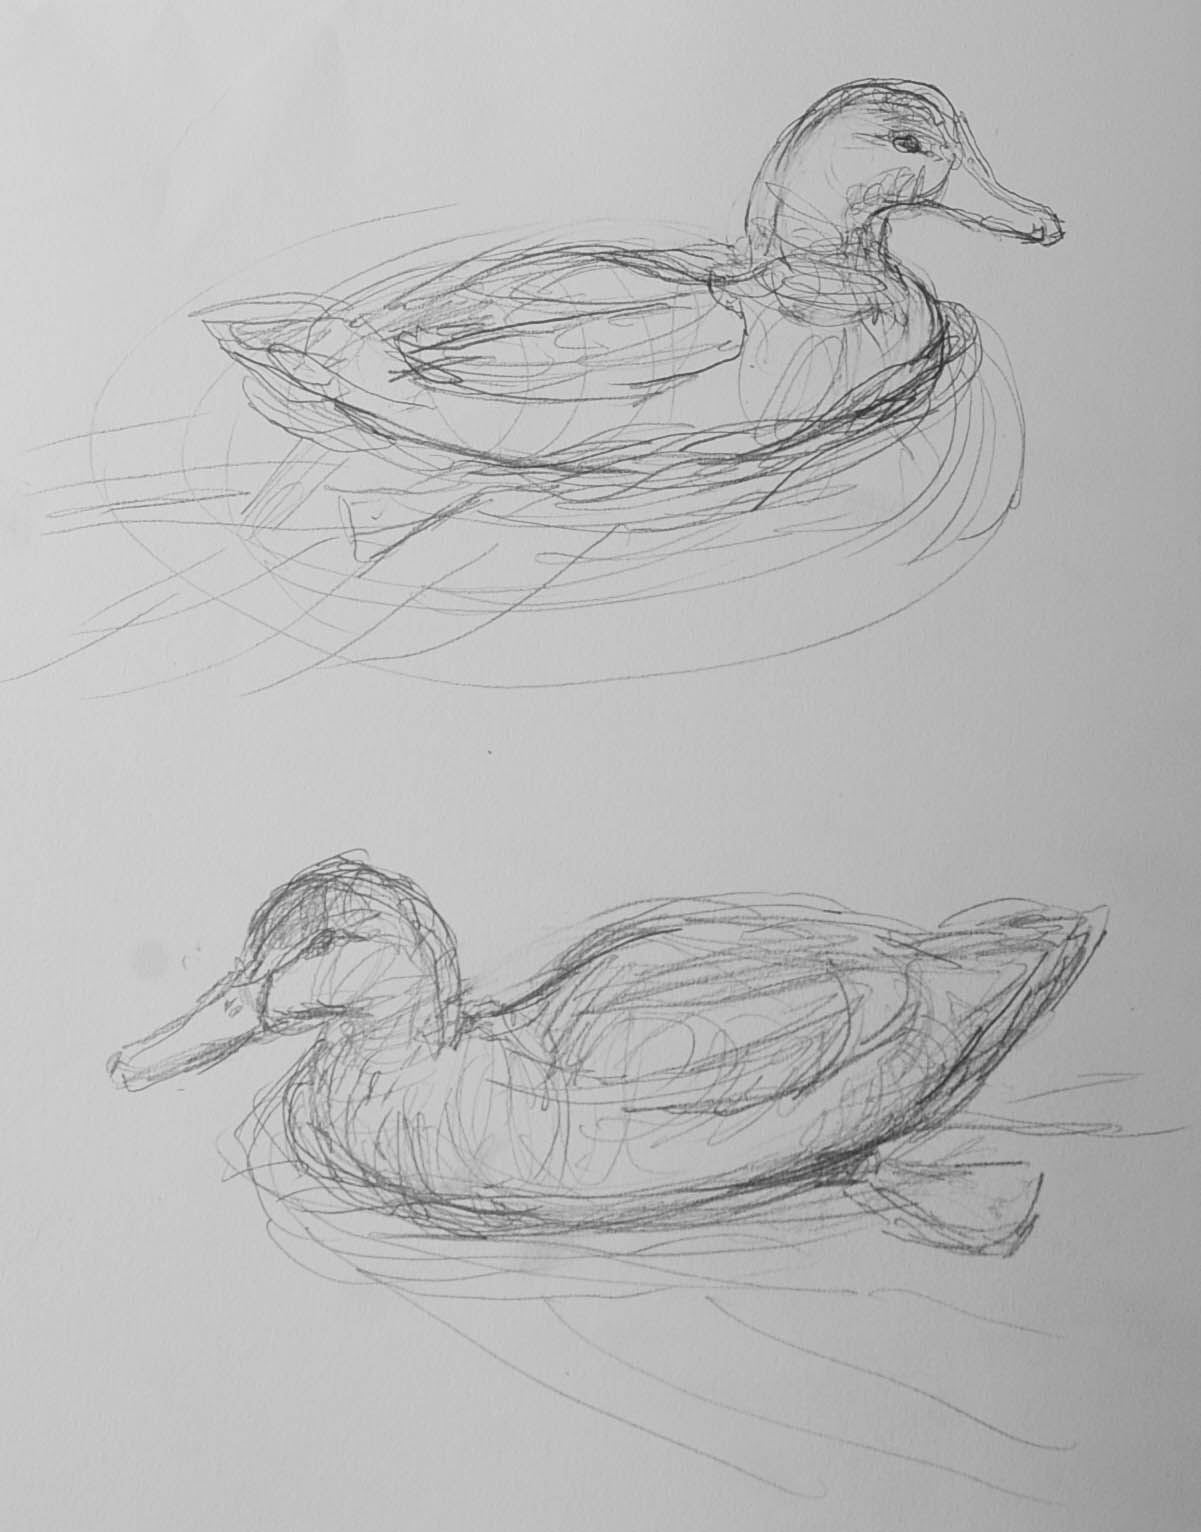 How to Draw a Duck : Step By Step Guide